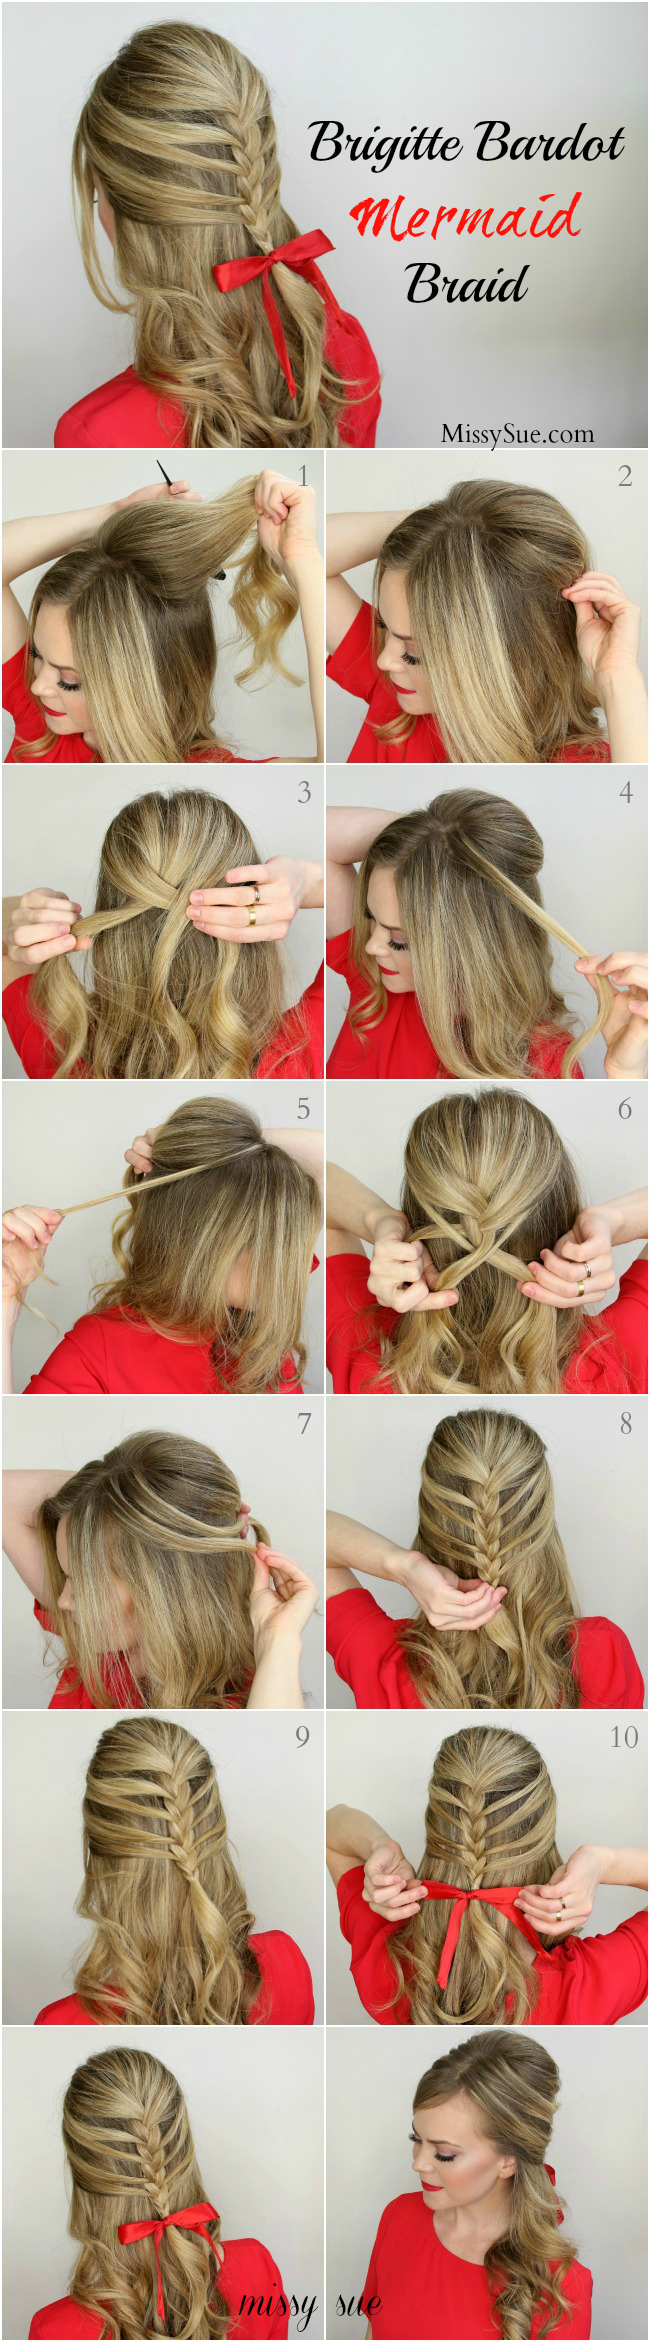 12 Braided Hairstyles You Should Try To